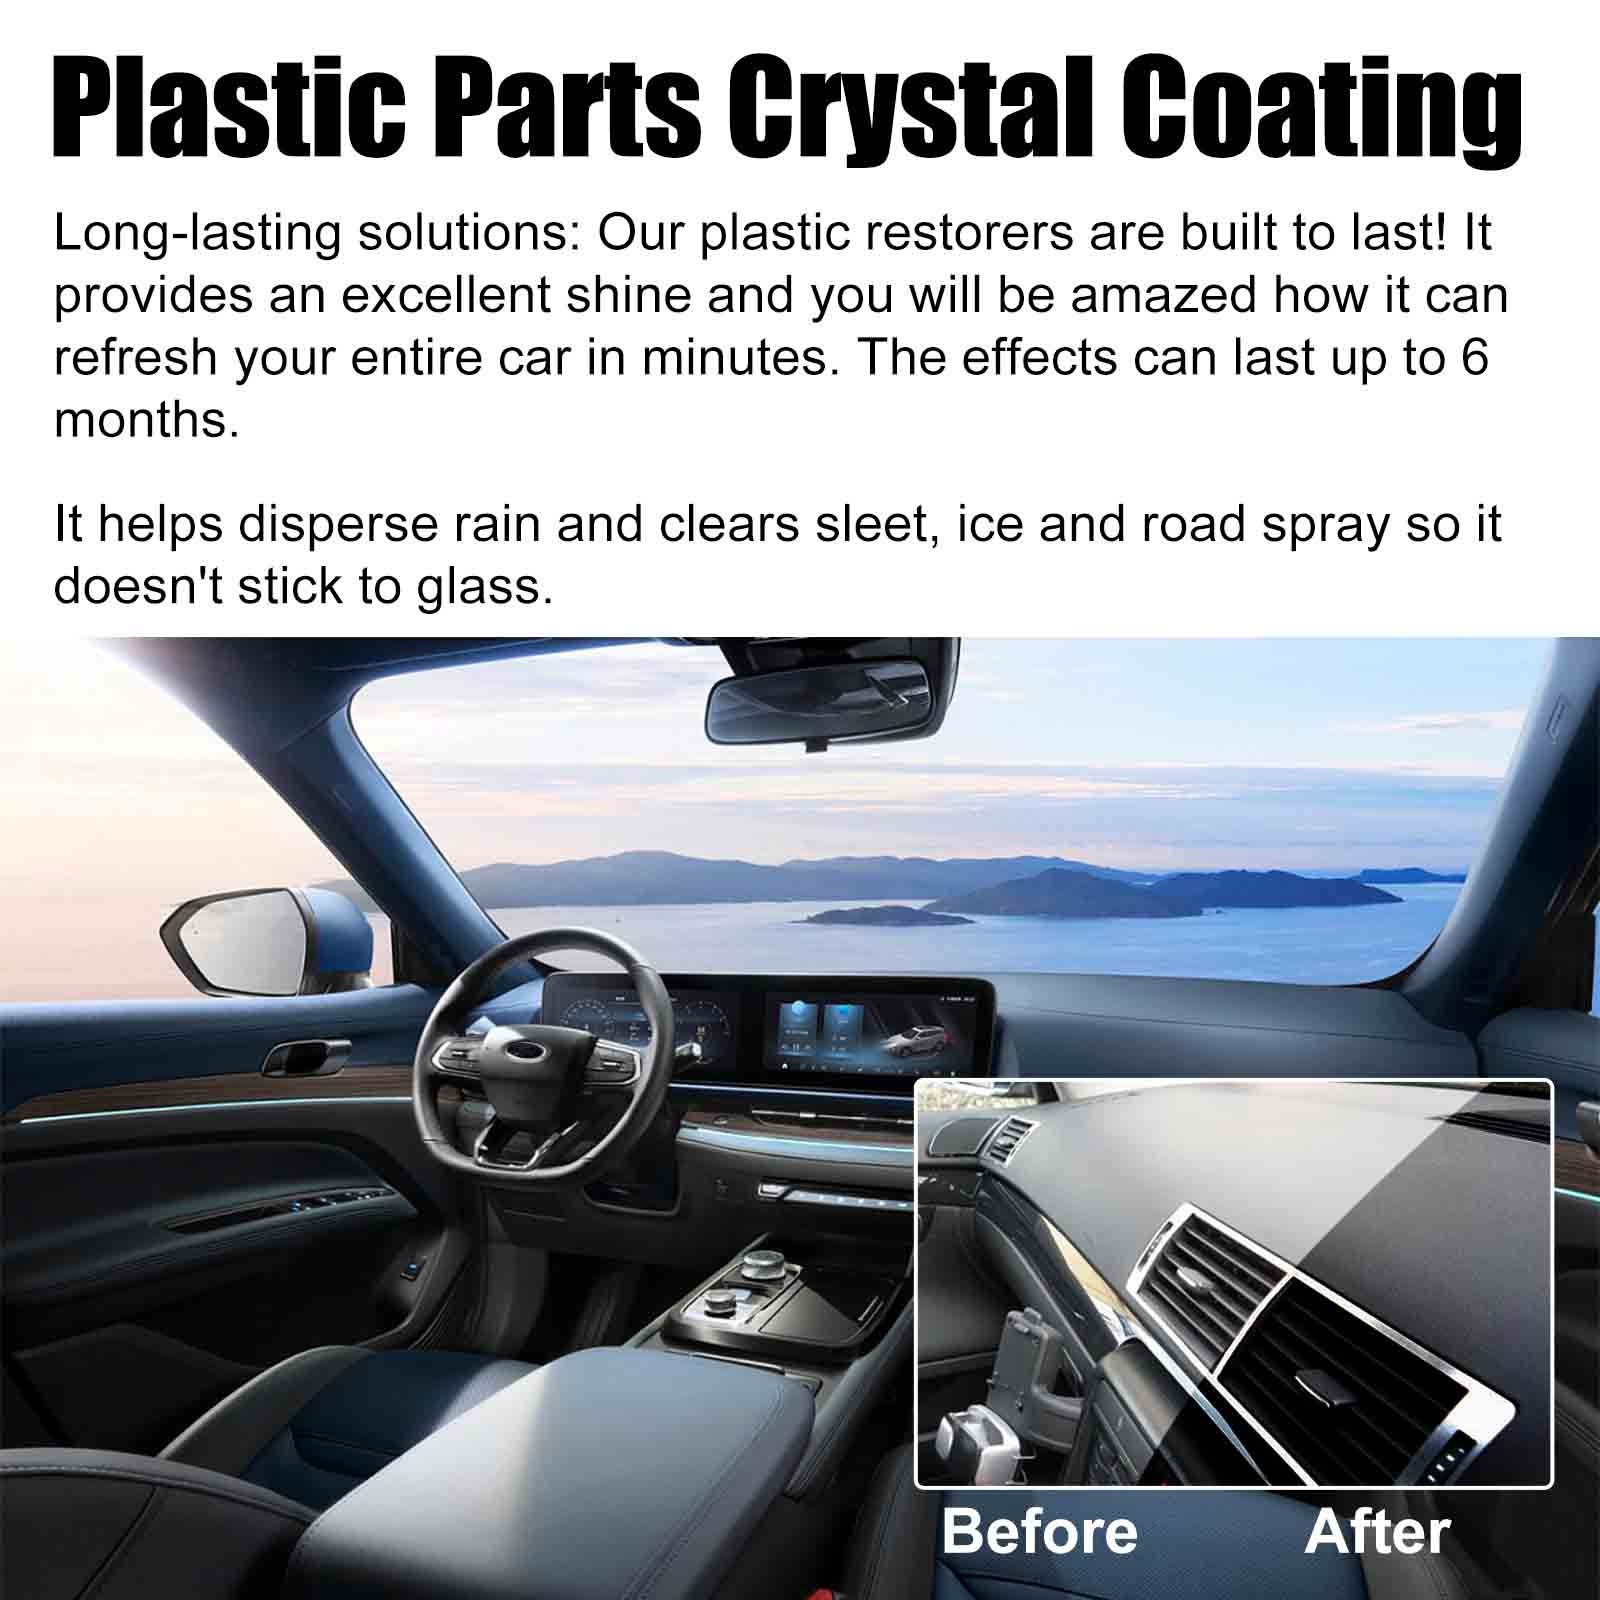 Ejwqwqe Crystal Coating for Car,Plastic Parts Crystal Coating,Plastic Parts Crystal Coating for Car,Easy to Use Car Refresher, Great Gloss Protection